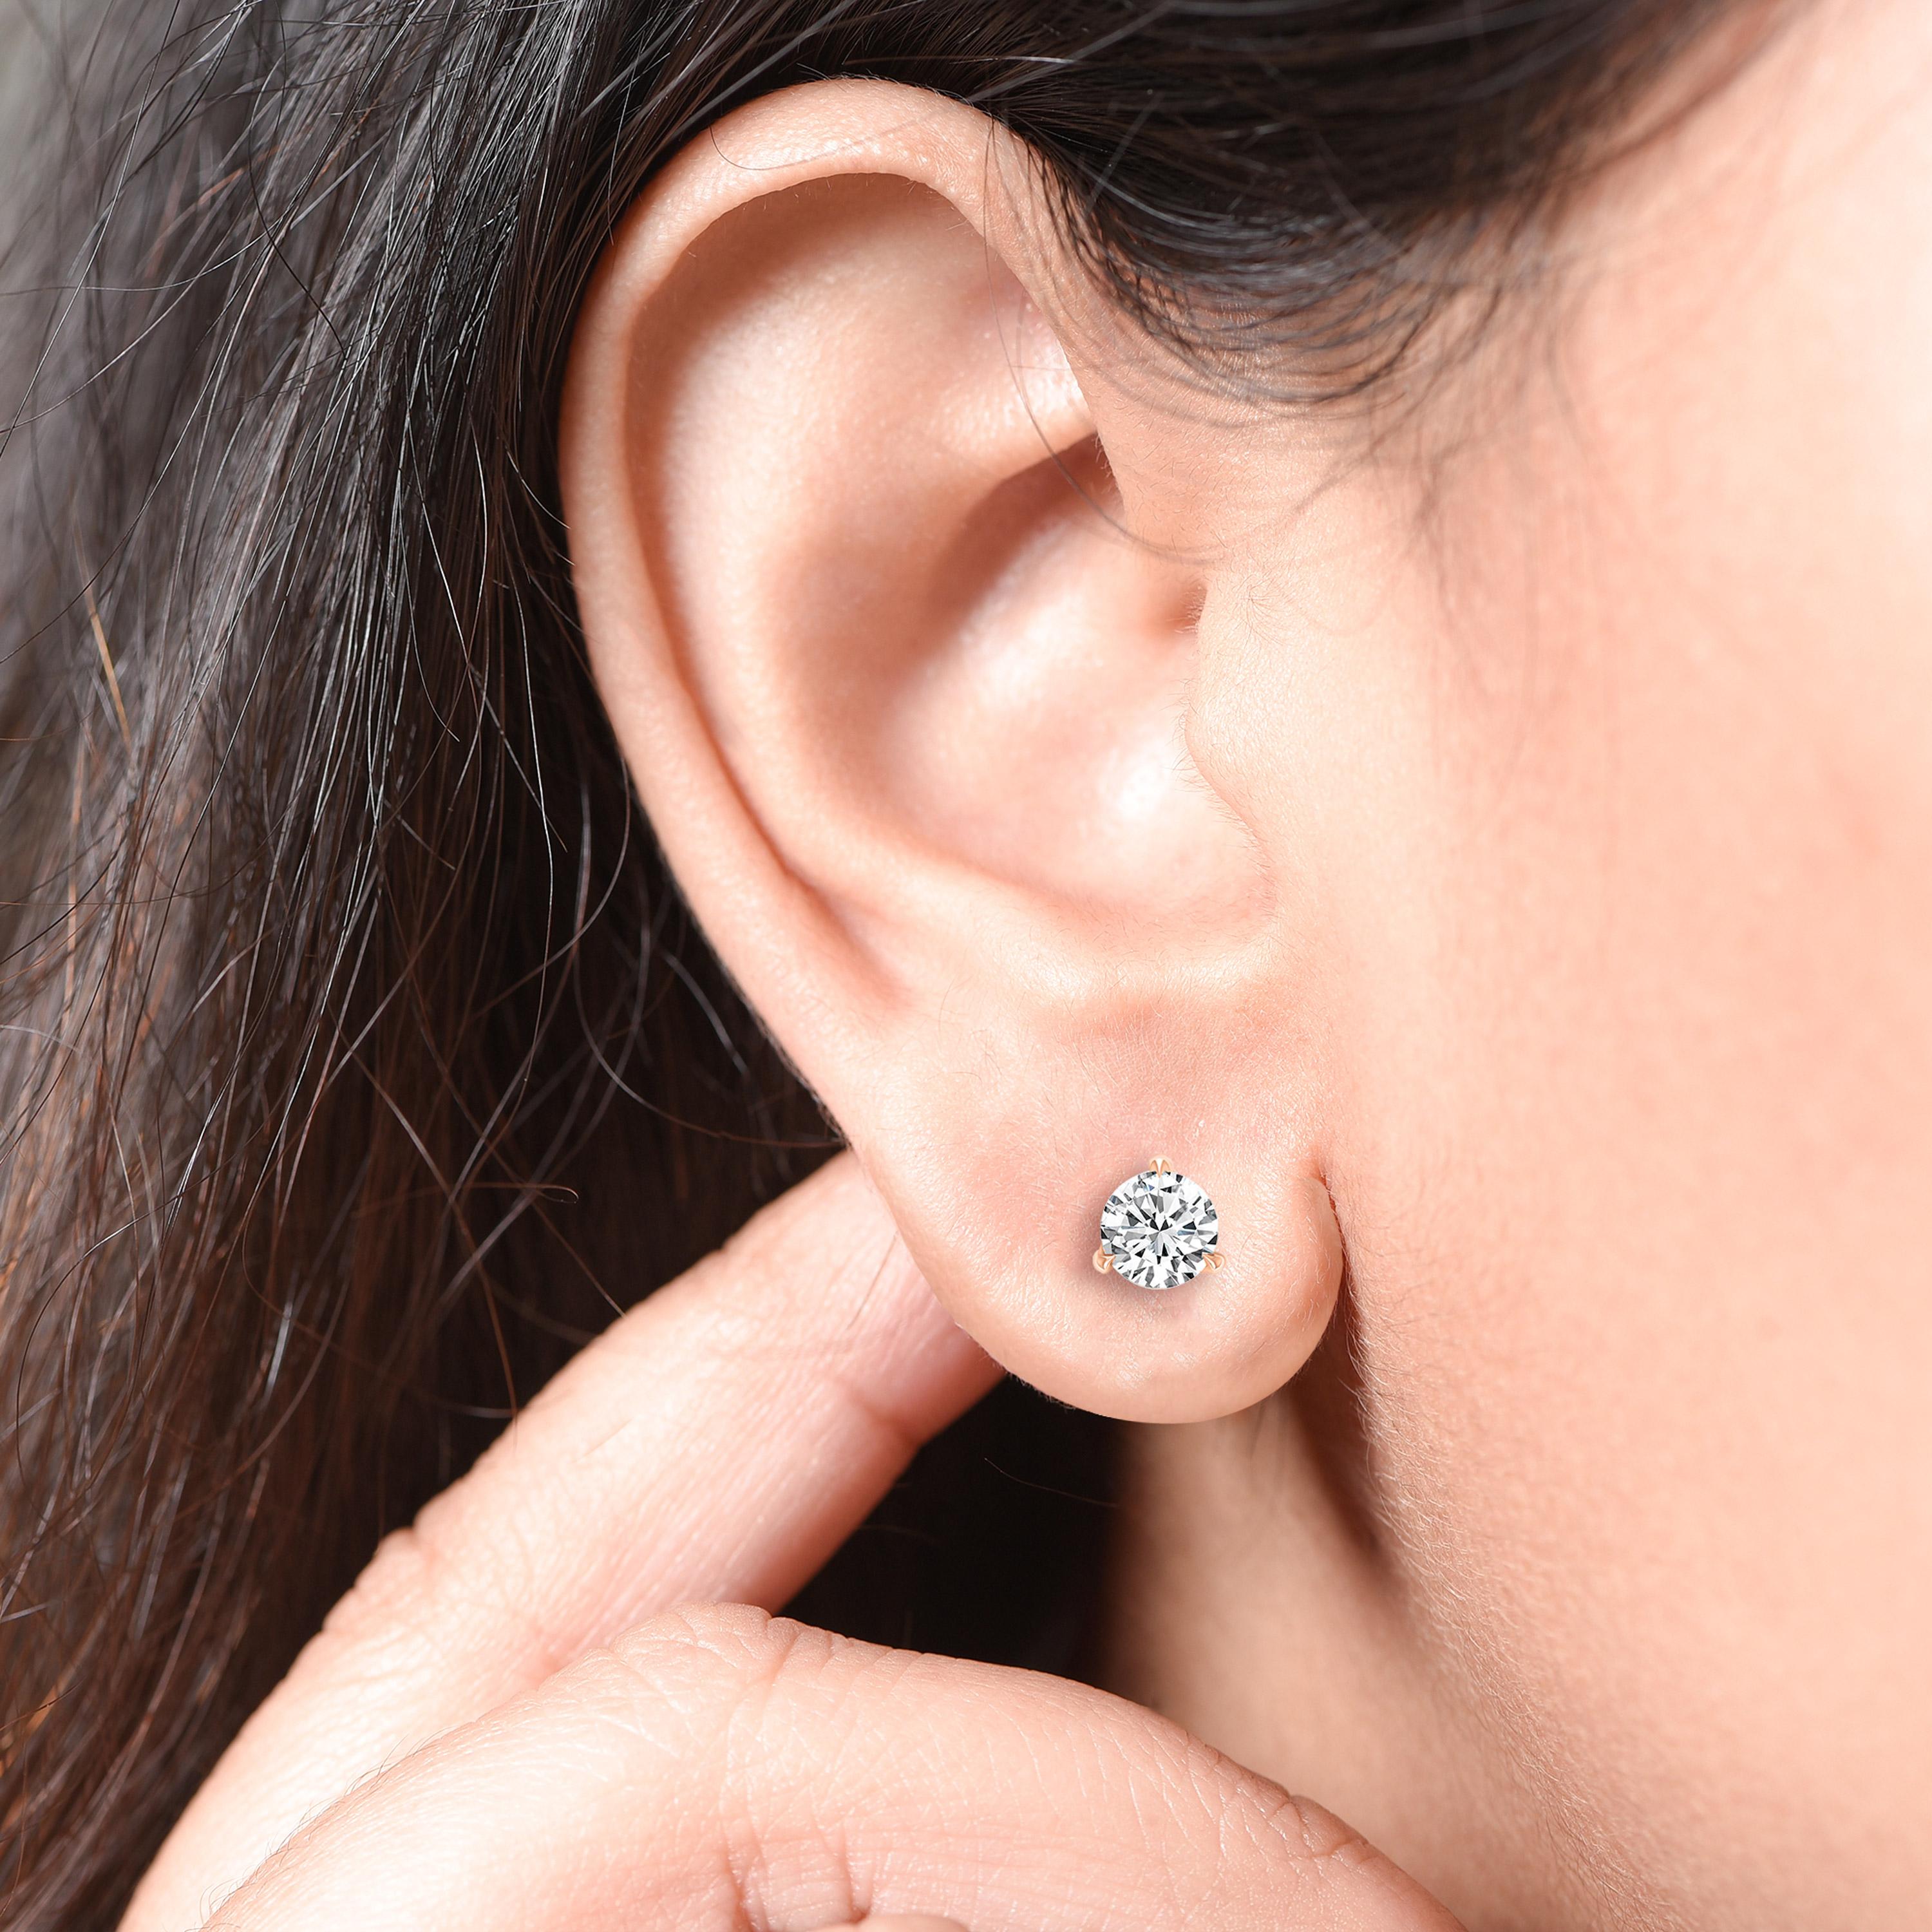 These GIA certified classic diamond studs showcase a pair of perfectly matched diamonds weighing total 1.00 carat. Crafted in 18-karat rose gold, these three prong earrings are available in white and yellow gold as well.

Perfect for gifting and for